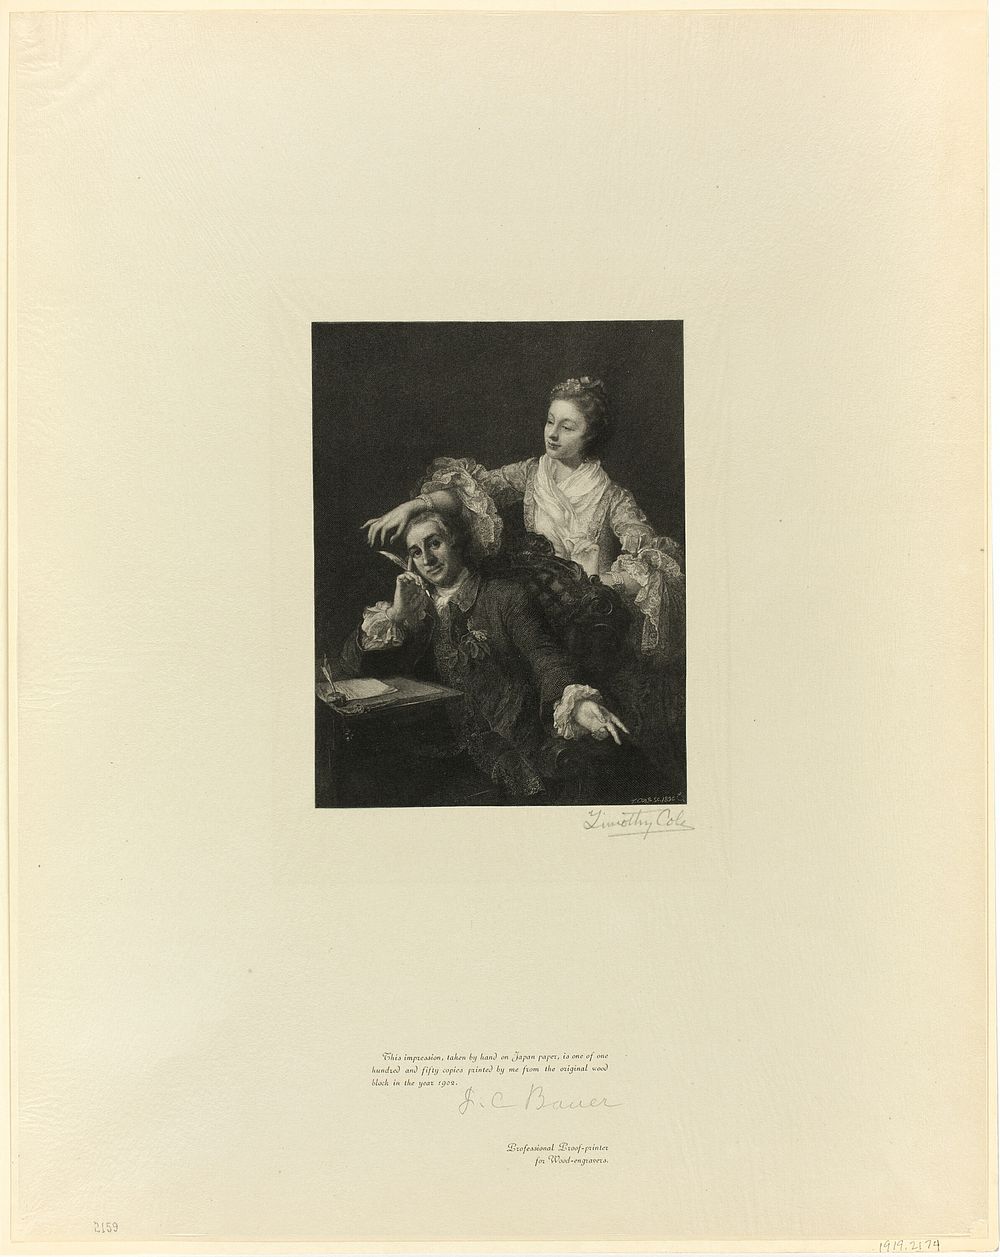 Garrick and his wife, from Old English Masters by Timothy Cole